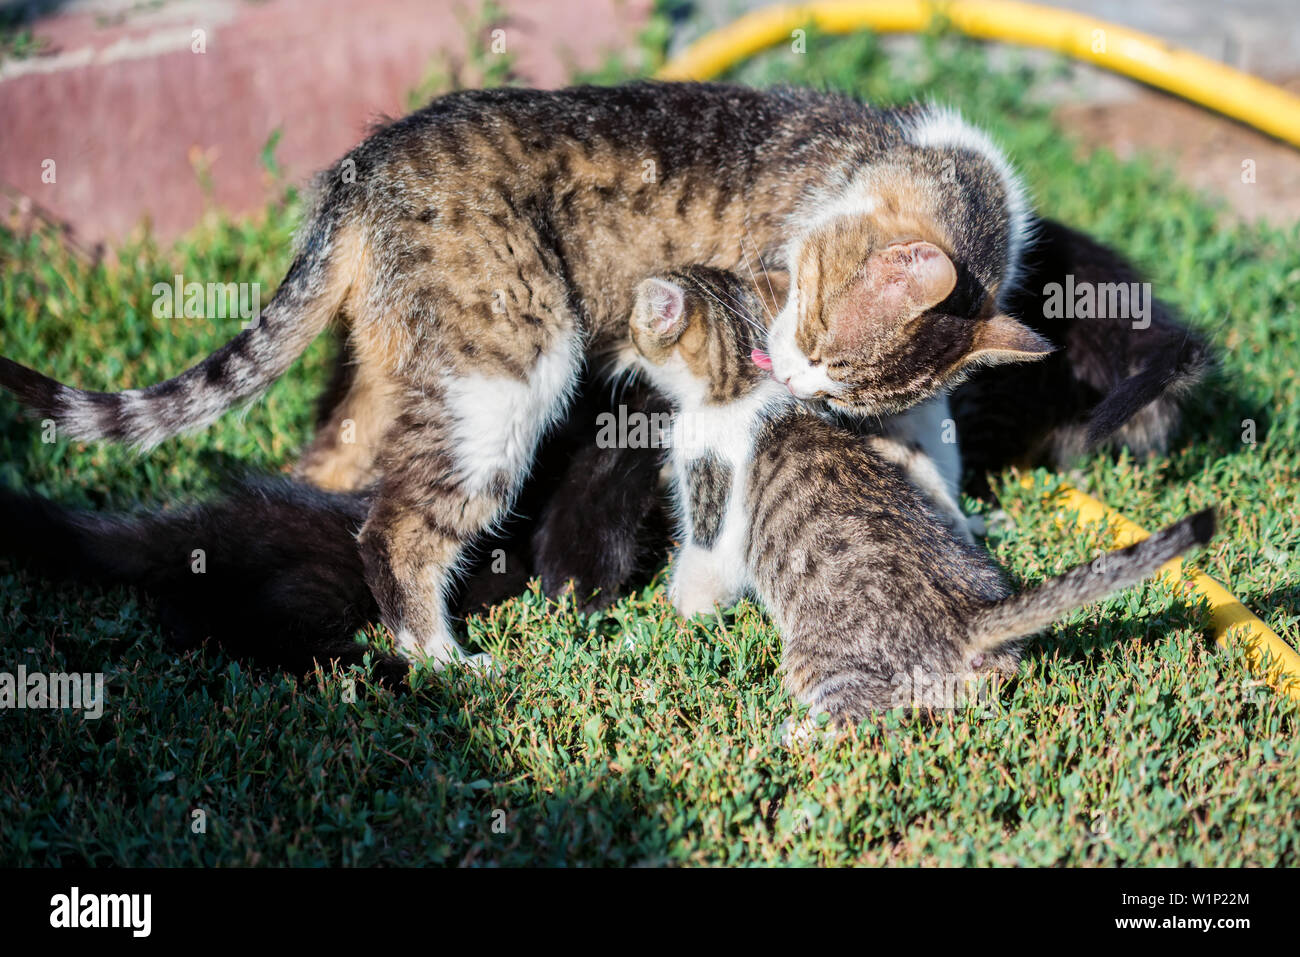 Mother cat licking her kitten child outdoors Stock Photo